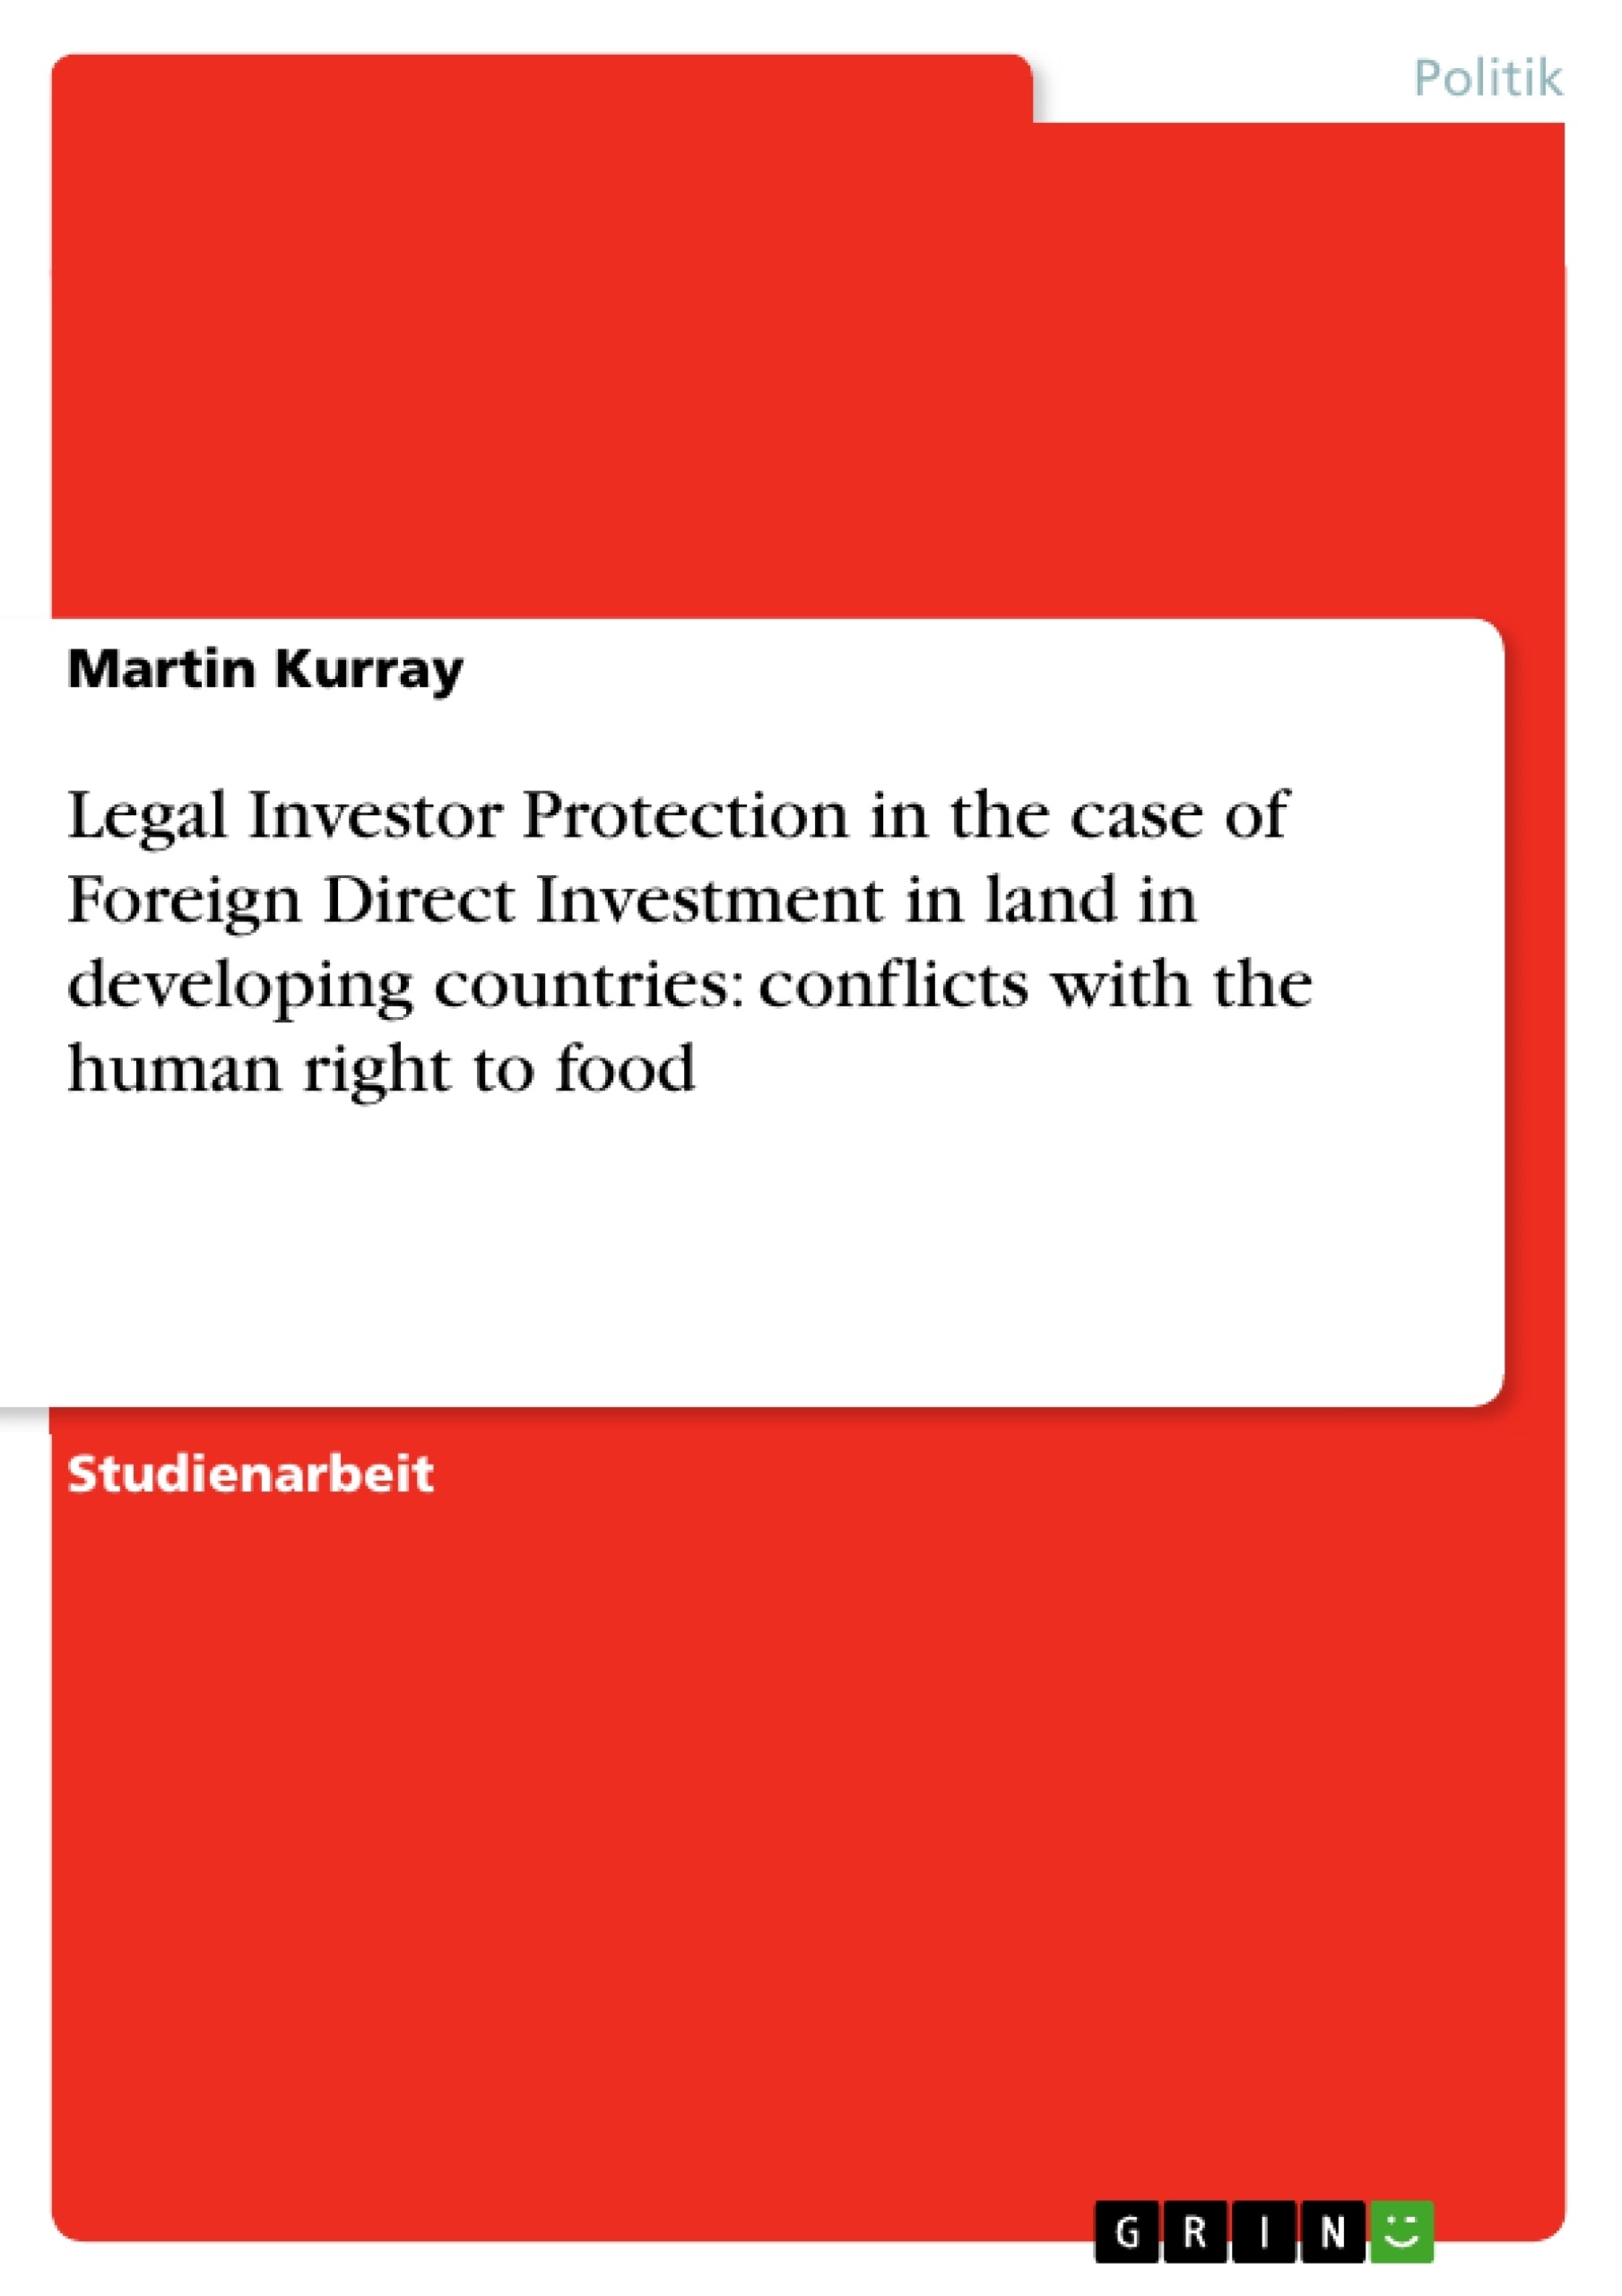 Titre: Legal Investor Protection in the case of Foreign Direct Investment in land in developing countries: conflicts with the human right to food